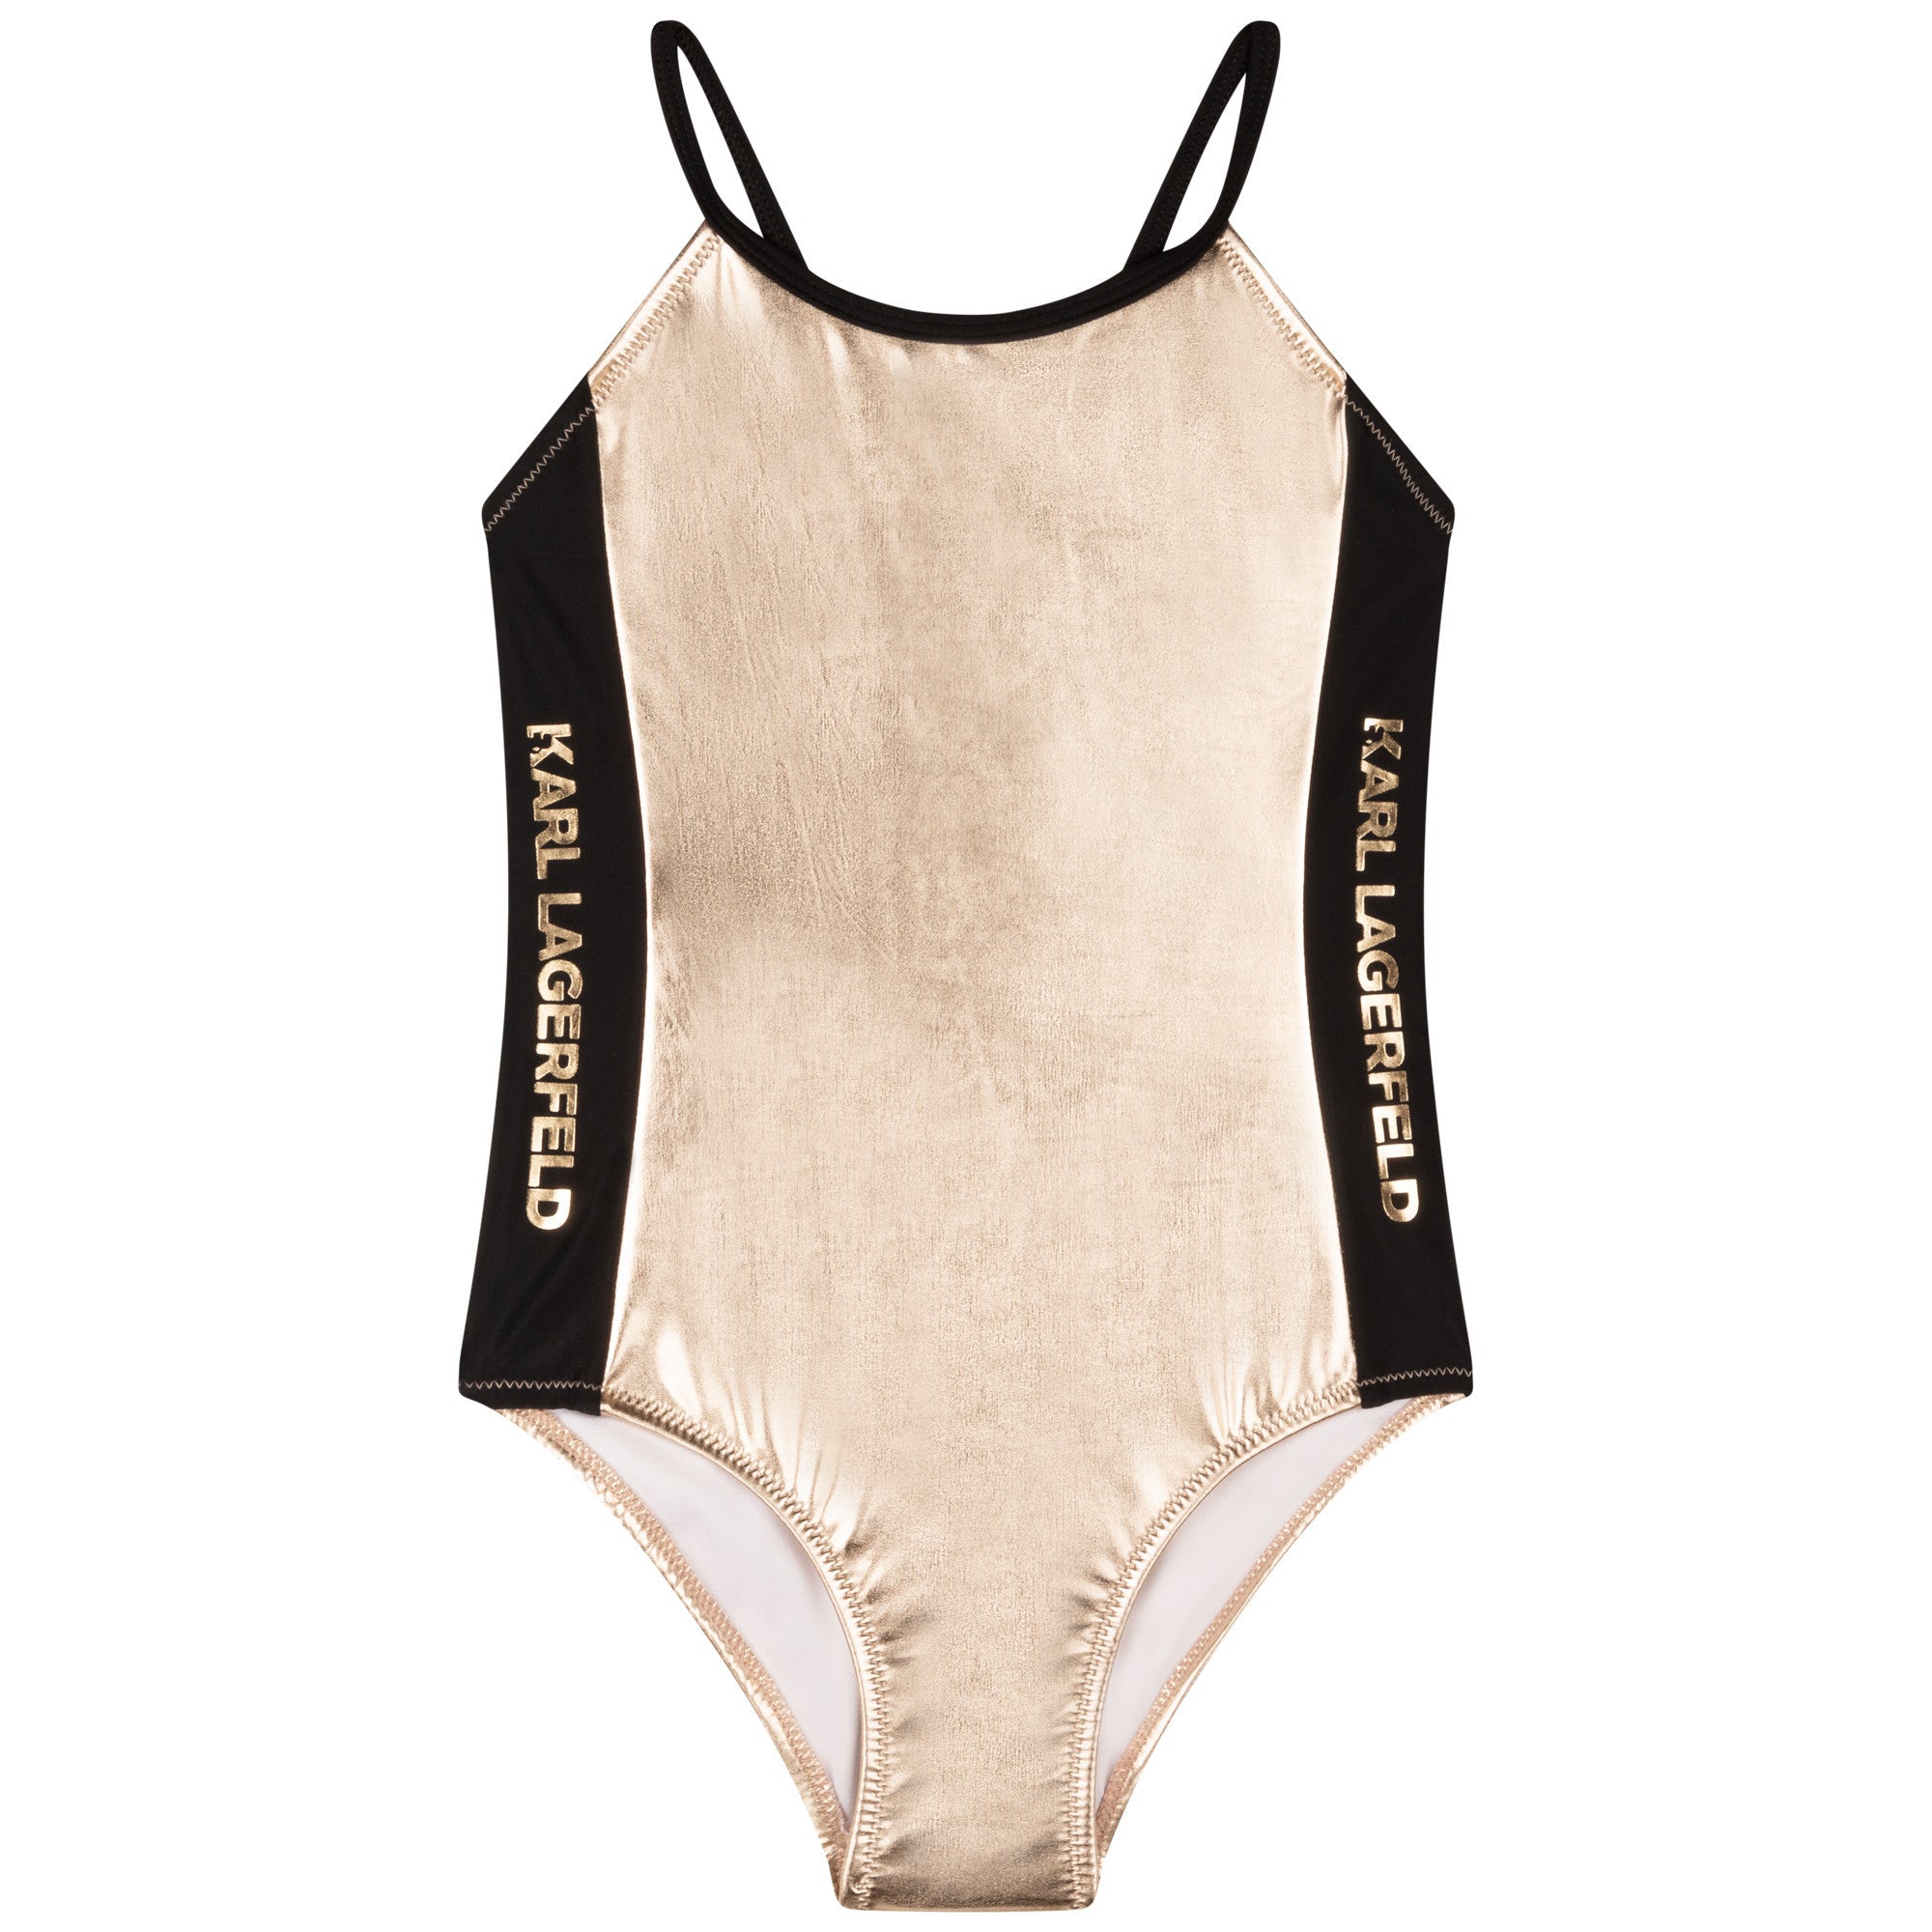 Karl Lagerfeld girls and teens metallic gold swimsuit with logo detail, stretchy and silky fabric